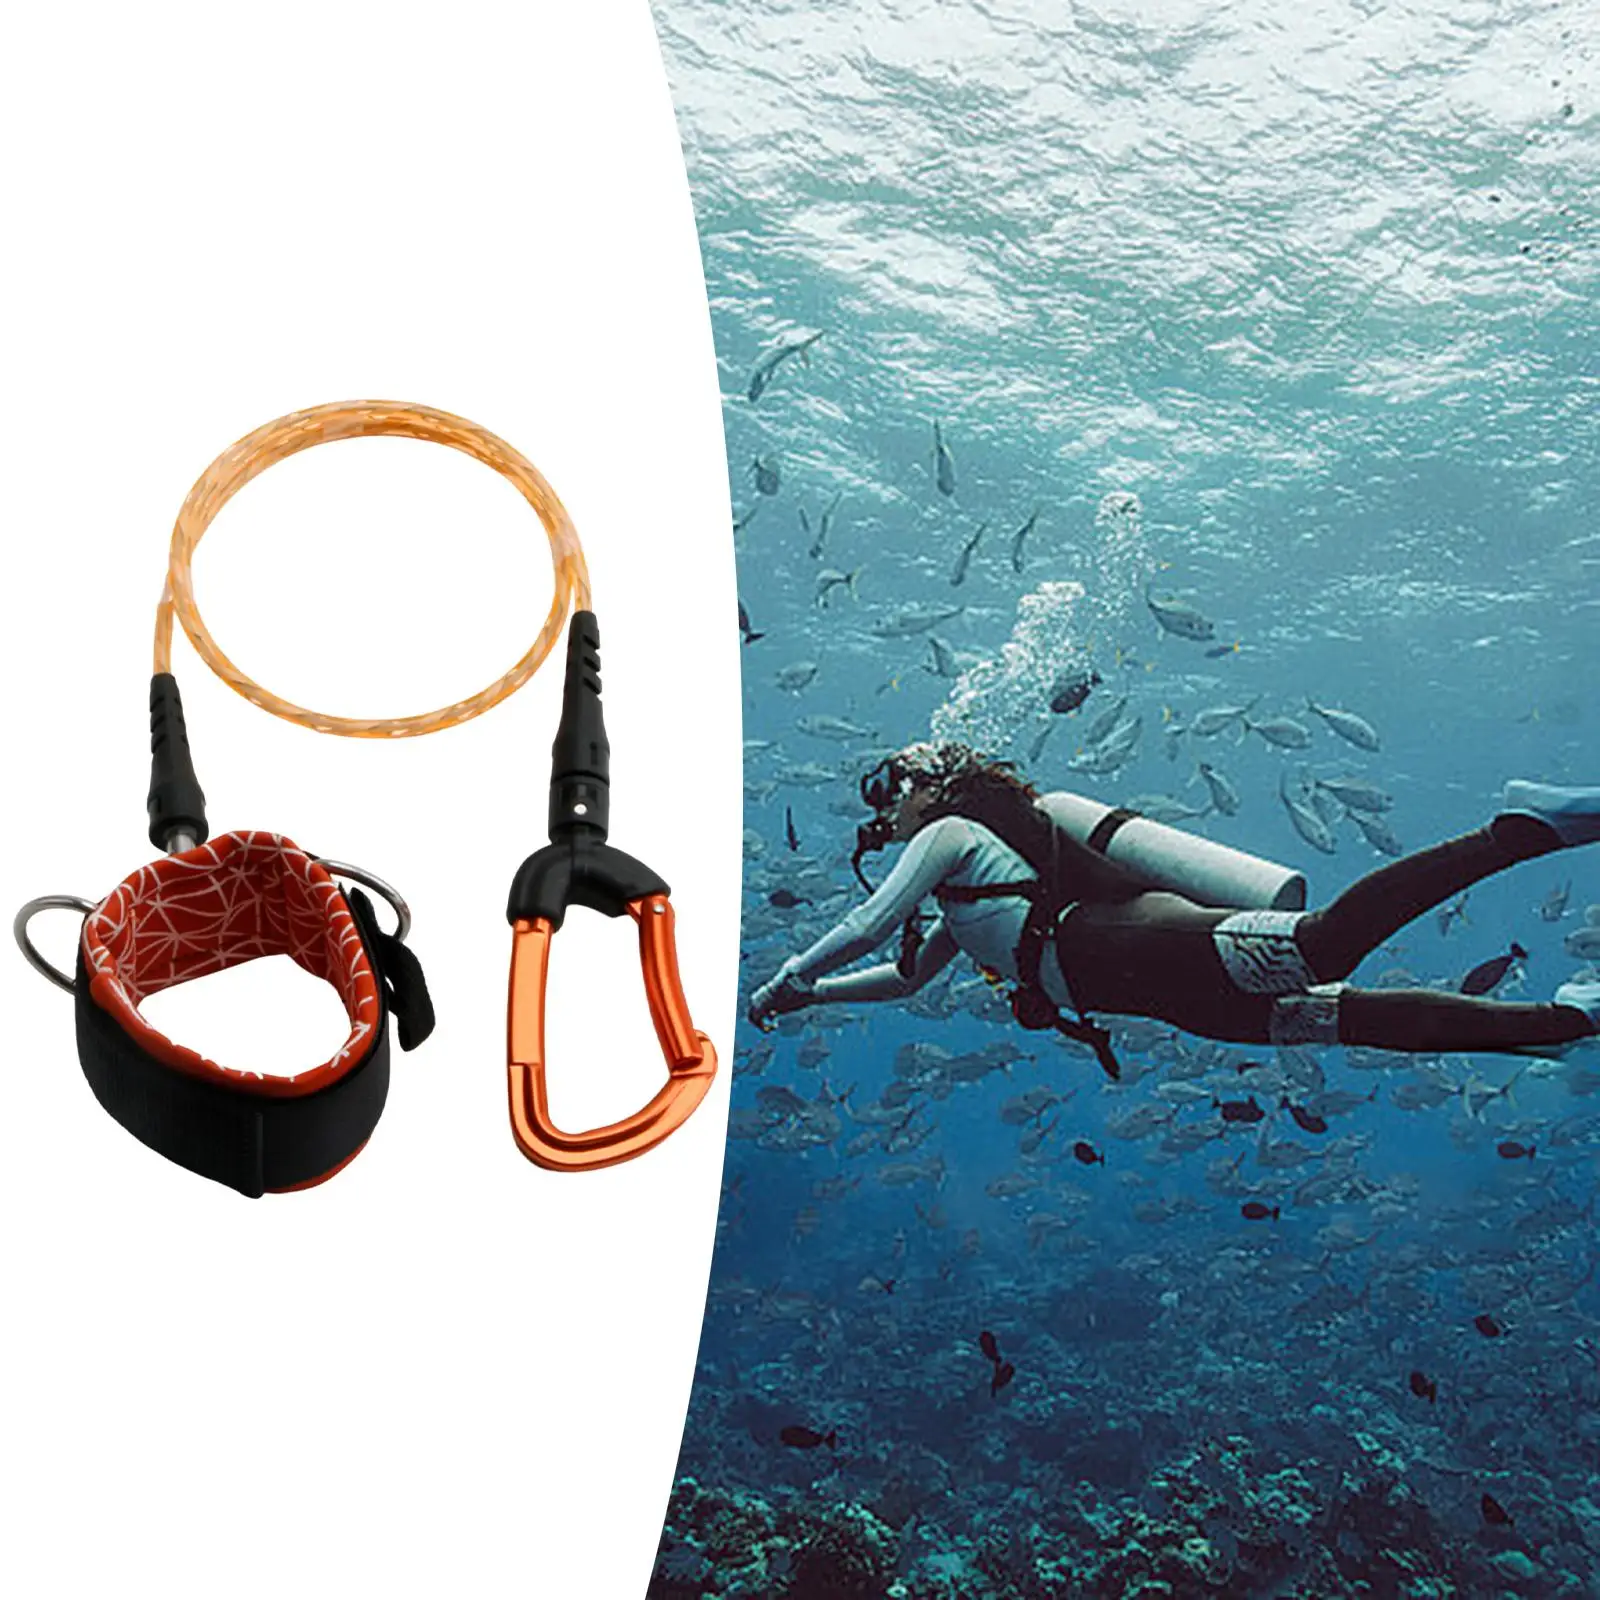 Freediving Lanyard Wristband Strap Breaking Force 24kN Safety Rope for Scuba Diving Freediving Snorkeling Underwater Sports Gear